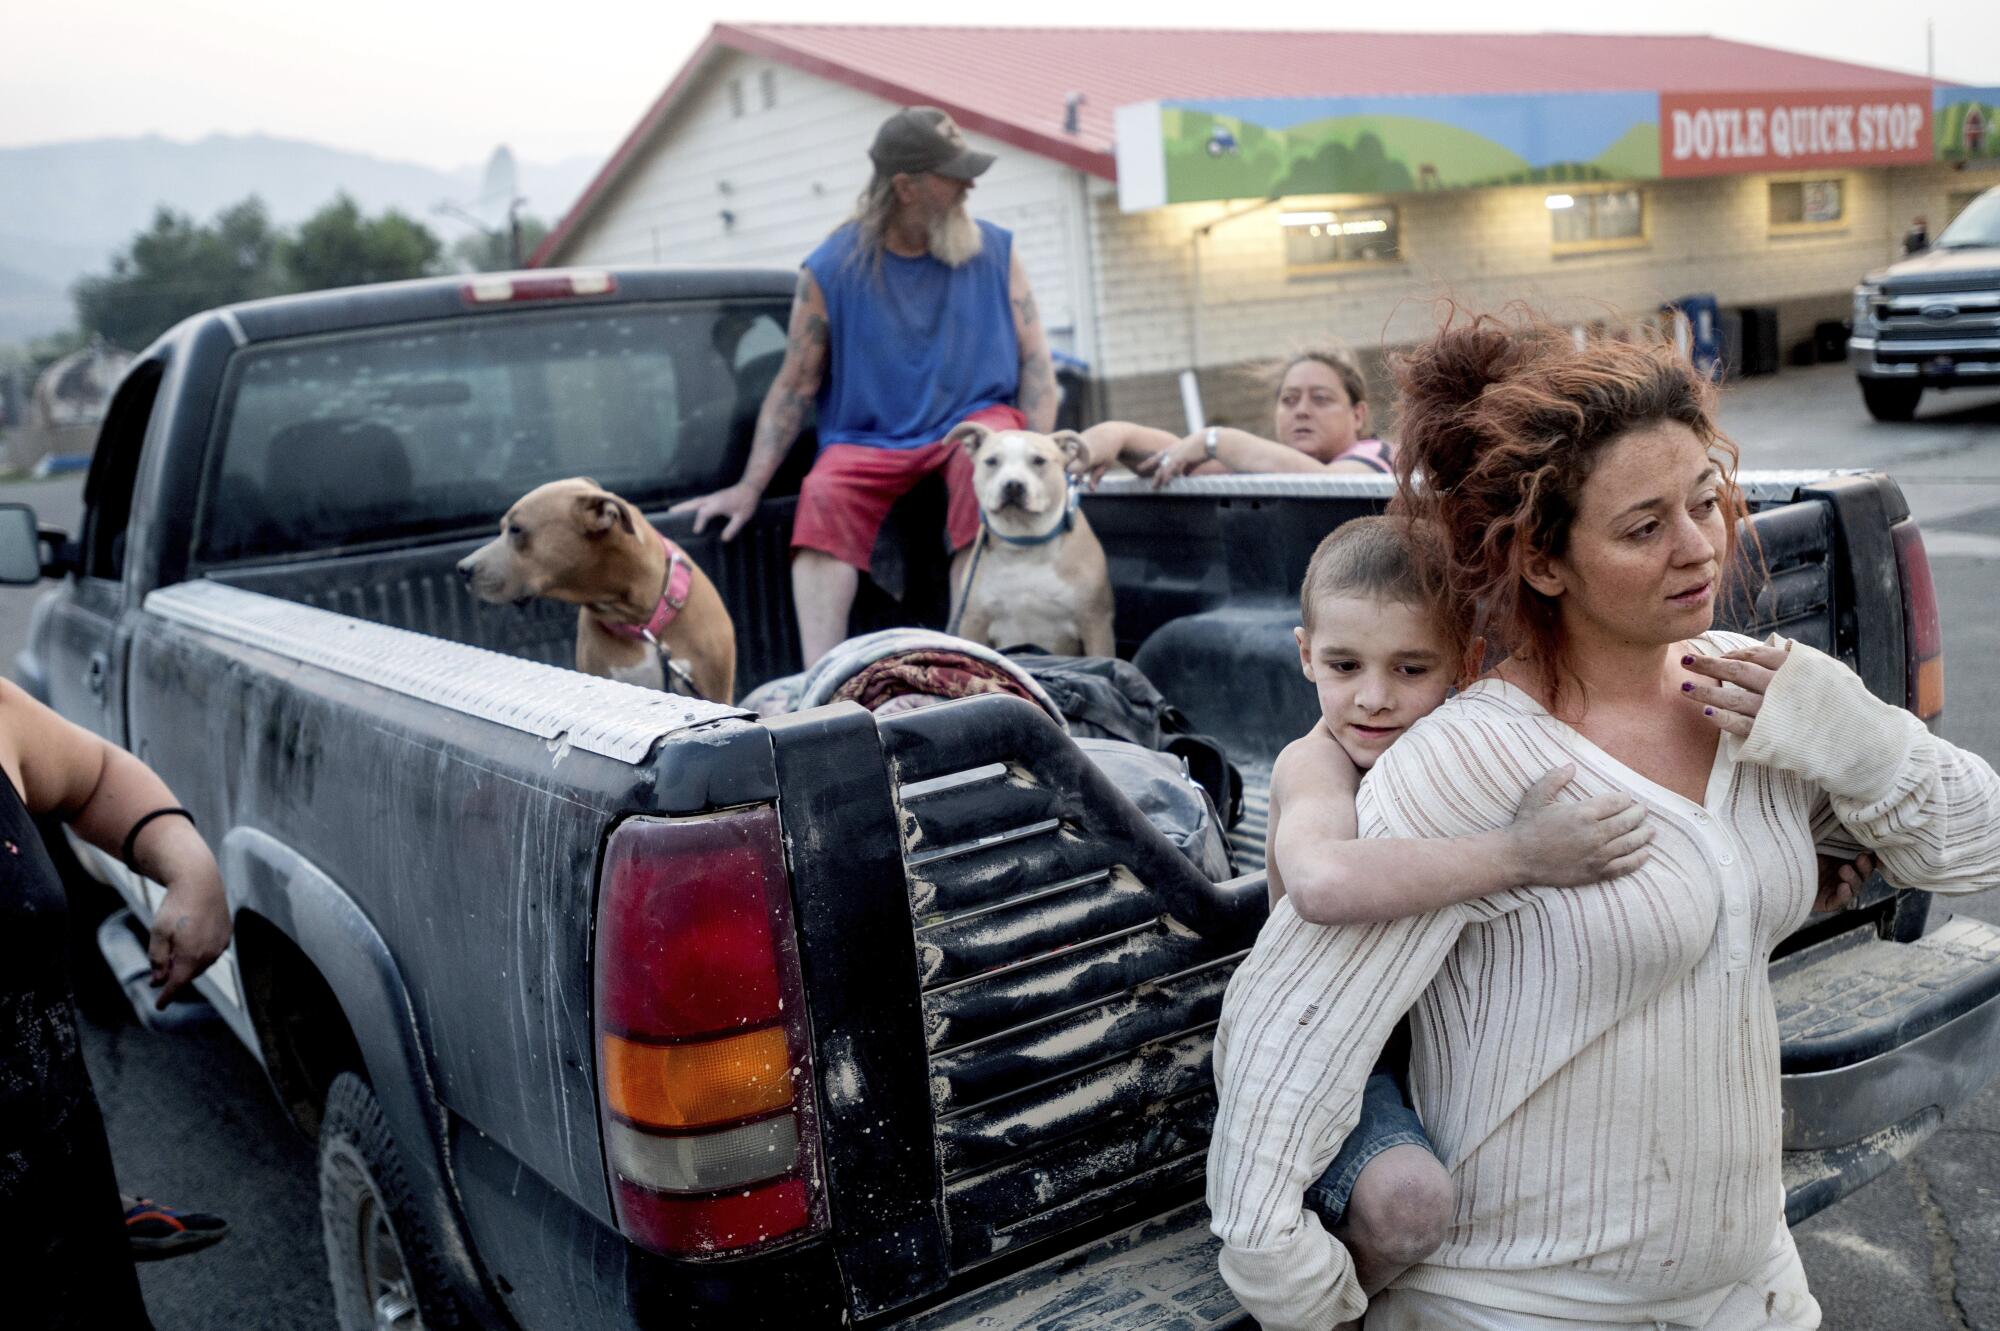 A woman holds a child as an older man and two dogs sit in the bed of a pickup truck.